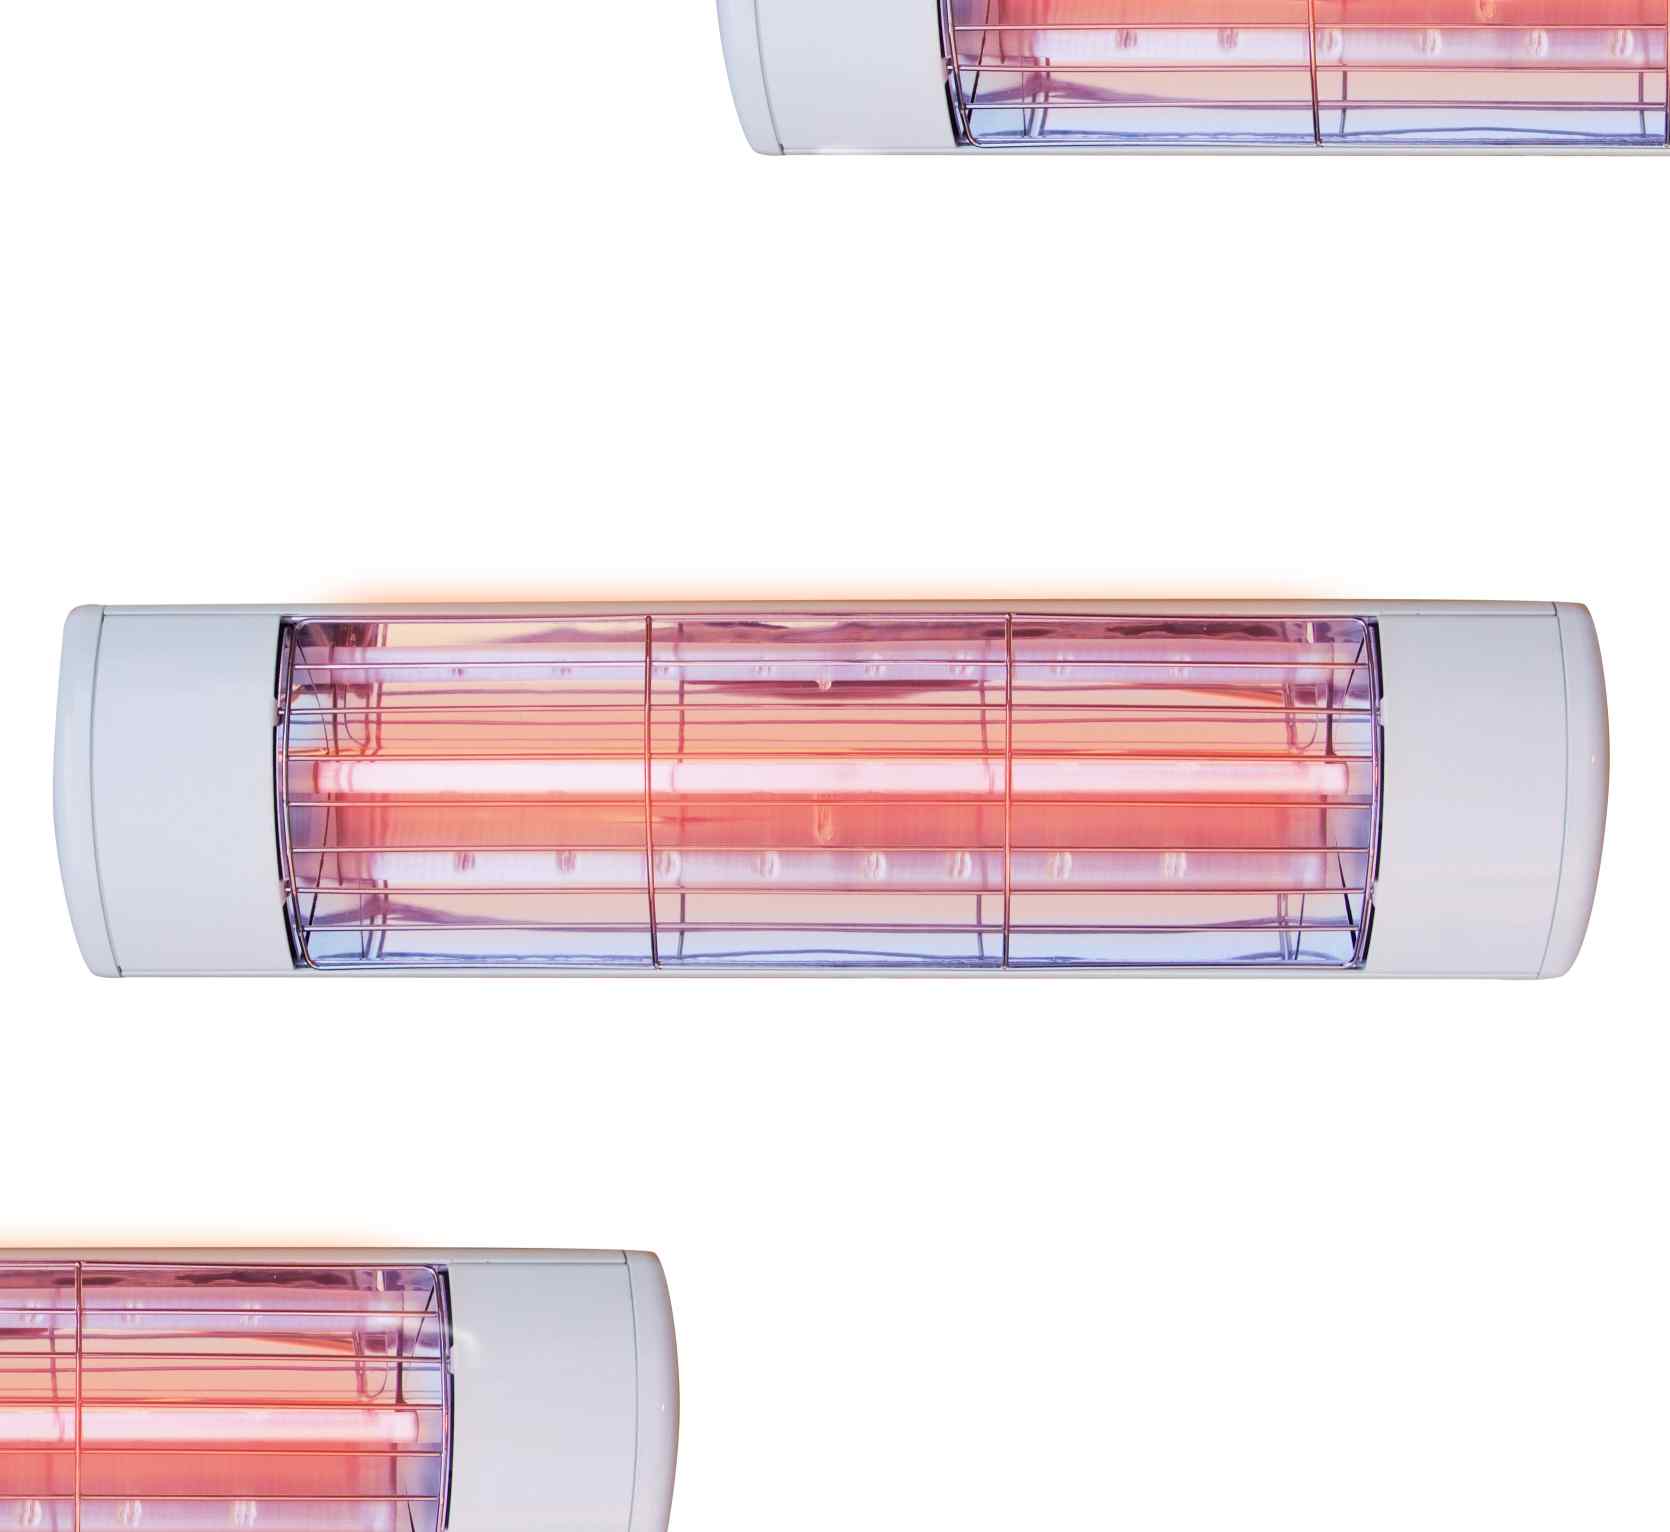 2kW Summerglow Infra-red Heater - White with Gold Lamp